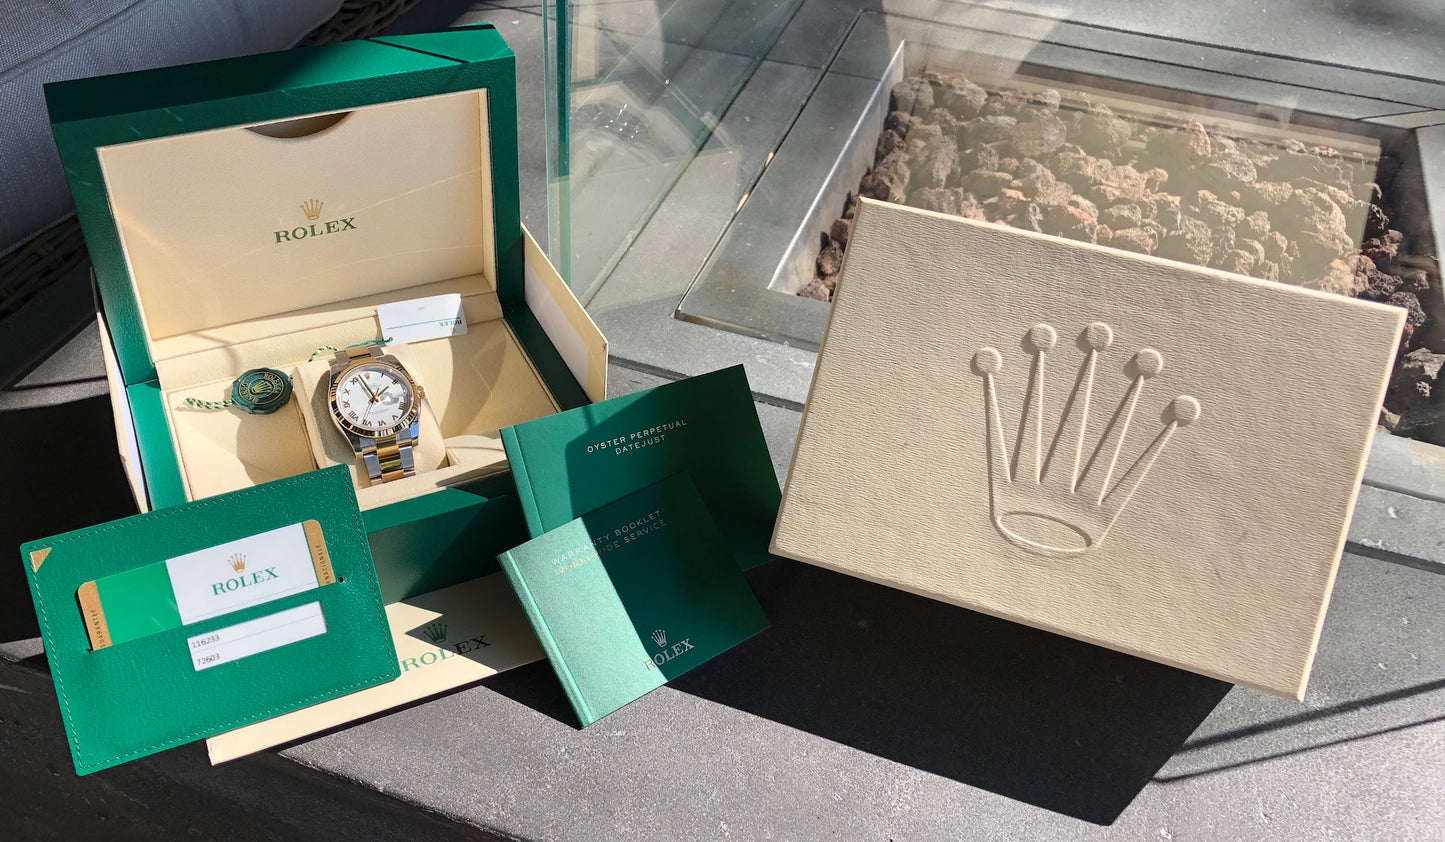 Rolex Datejust 116233 White Roman Two Tone Steel Gold Oyster Wristwatch Box & Papers New Unworn - Hashtag Watch Company